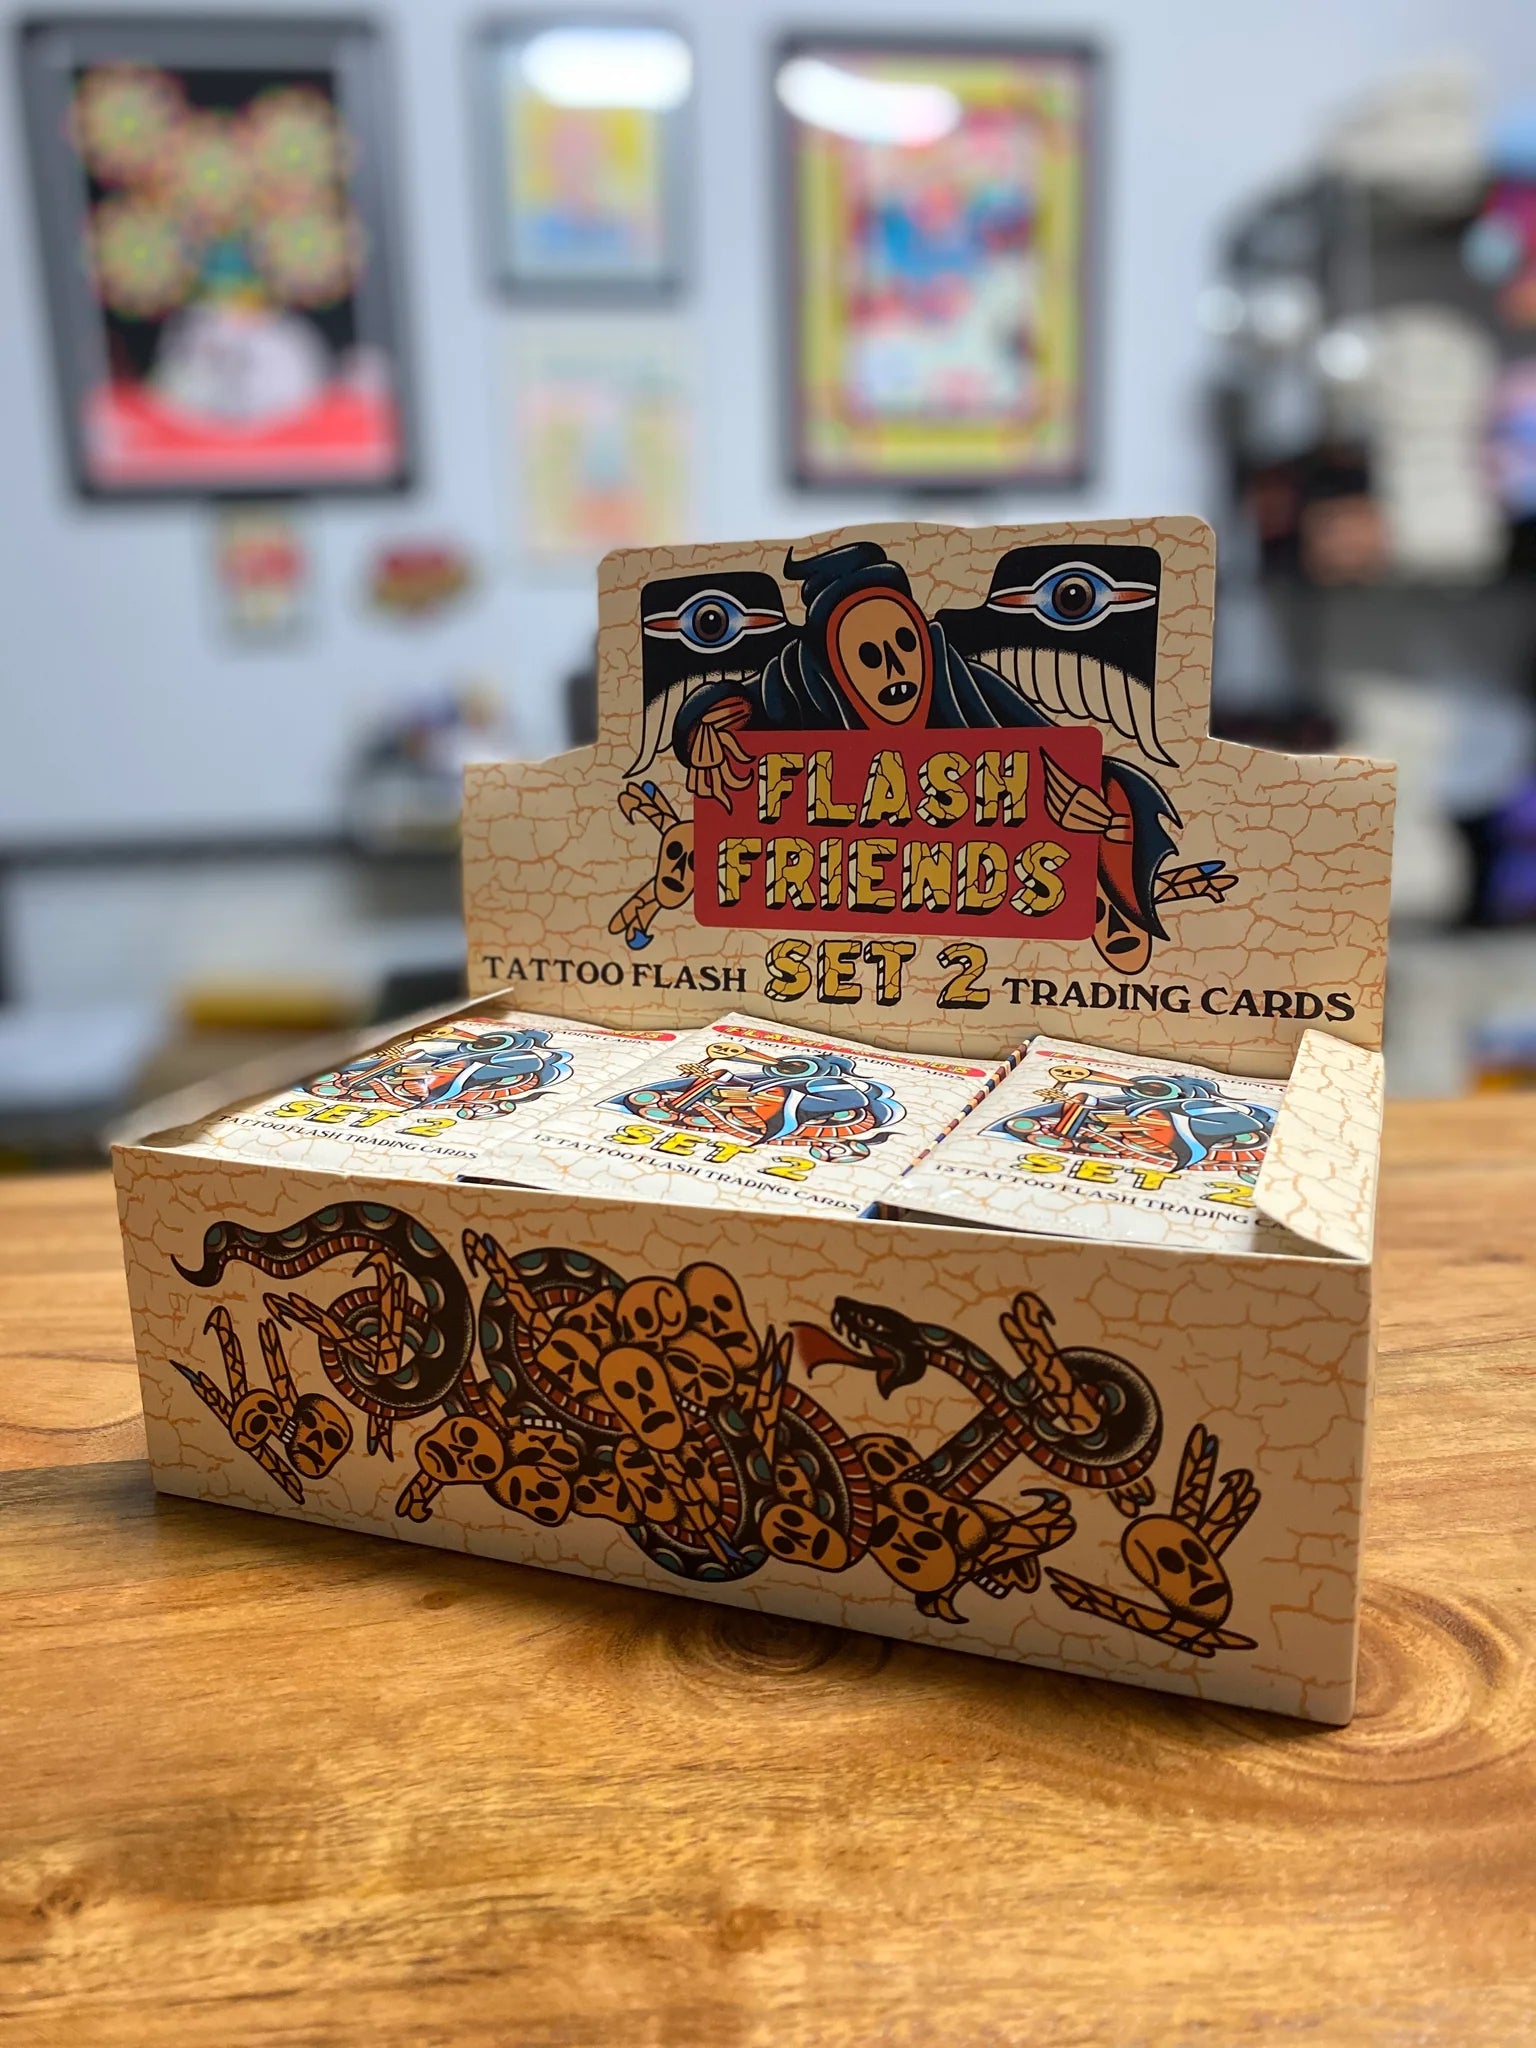 A box of Flash Friends Trading Cards - Set 2 on a table, featuring various card designs and pack options.